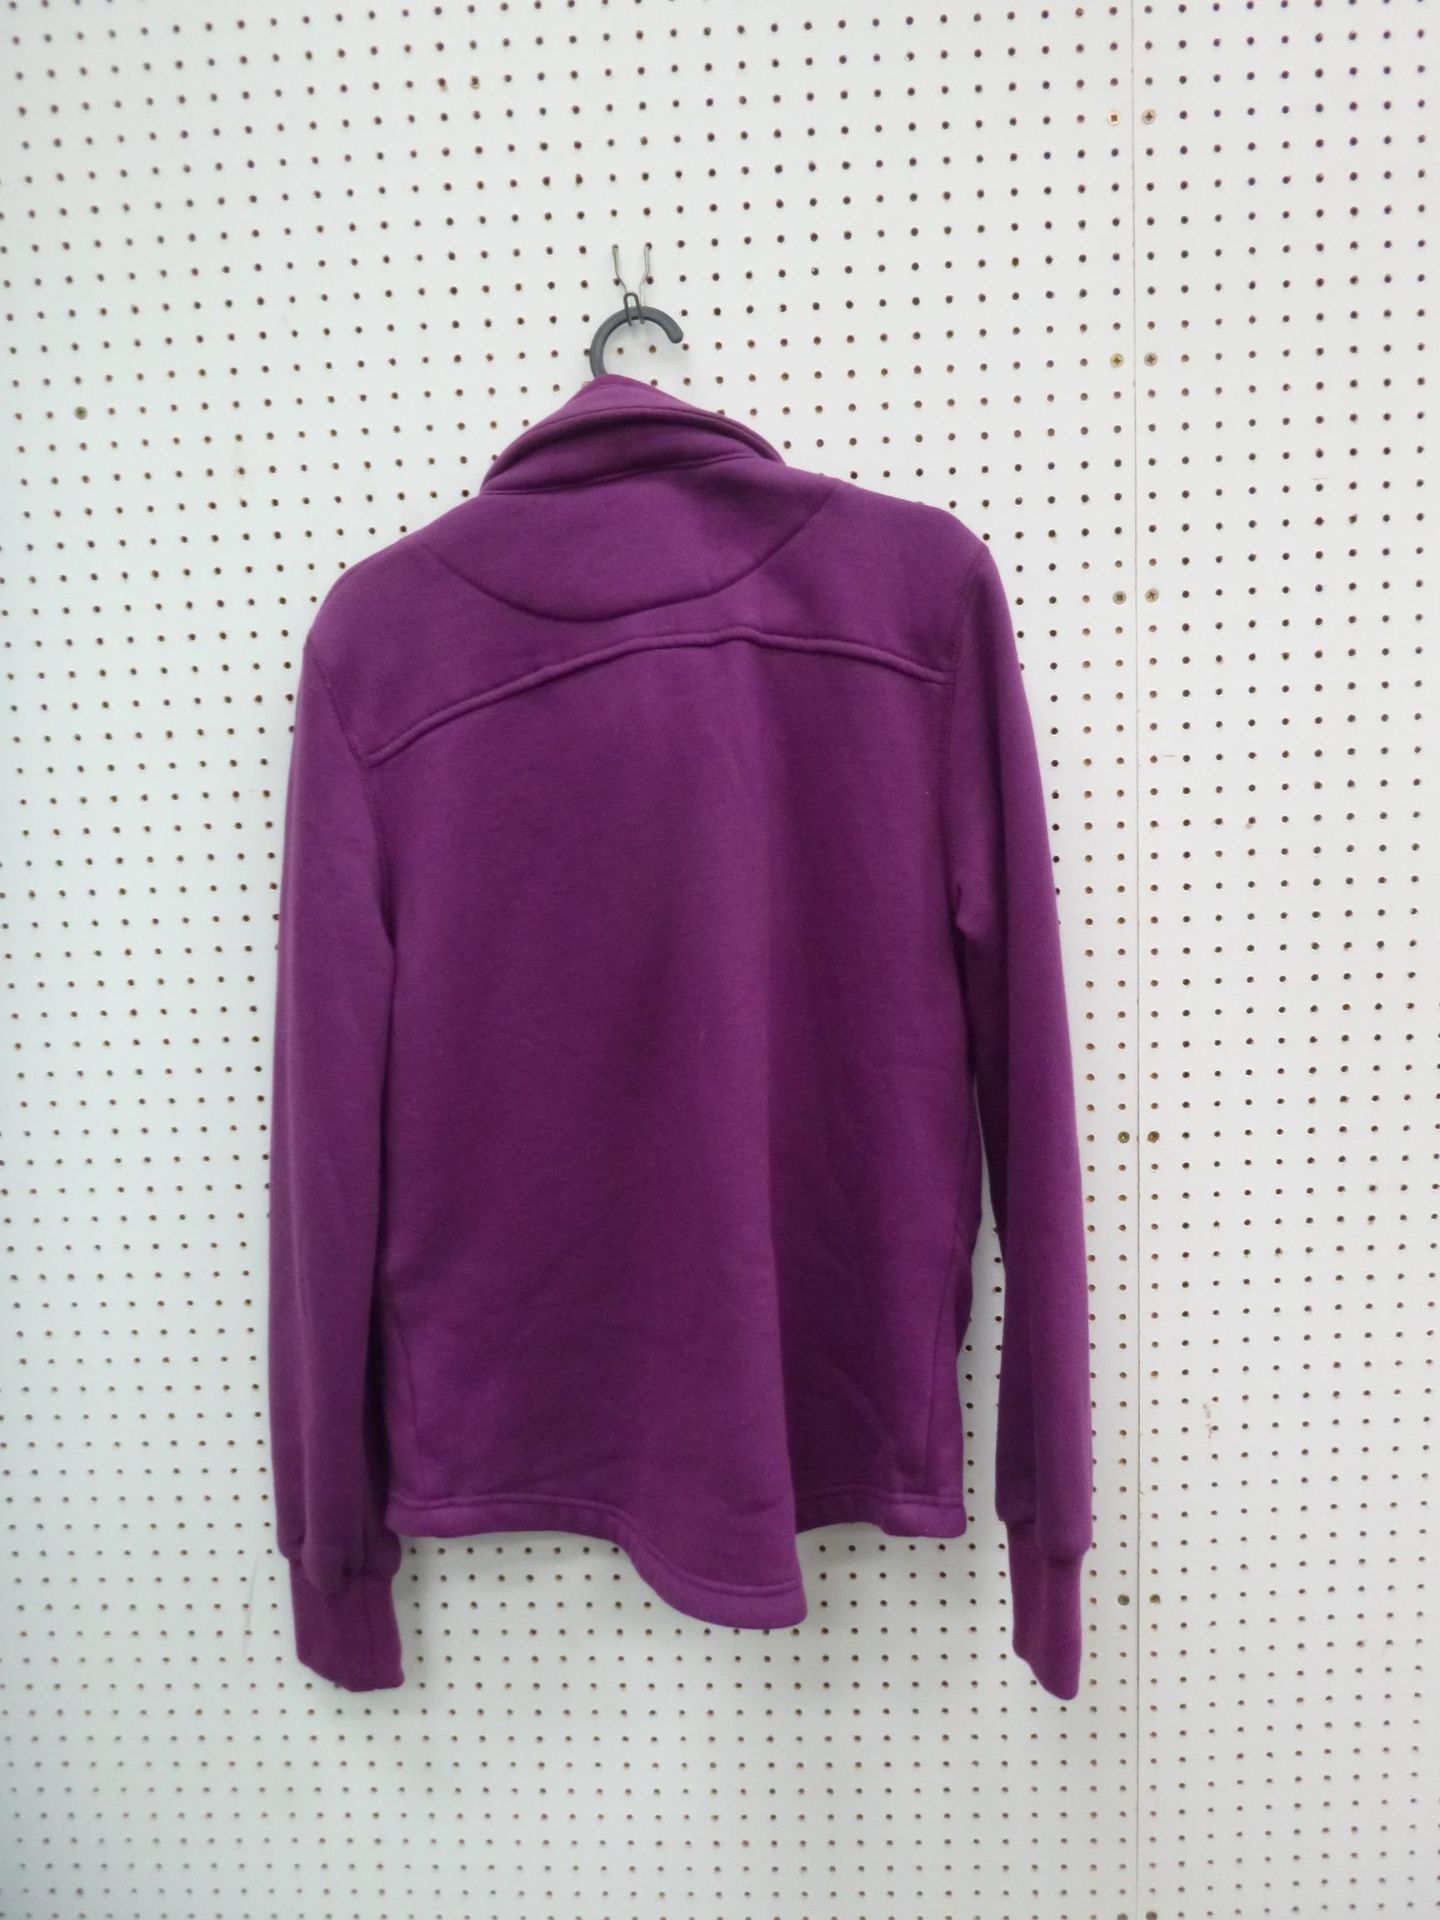 * Three New 'Equatech' Peakdale Sweaters in Mulberry, A Small, Medium and XX Large RRP £111 (3) - Image 2 of 2